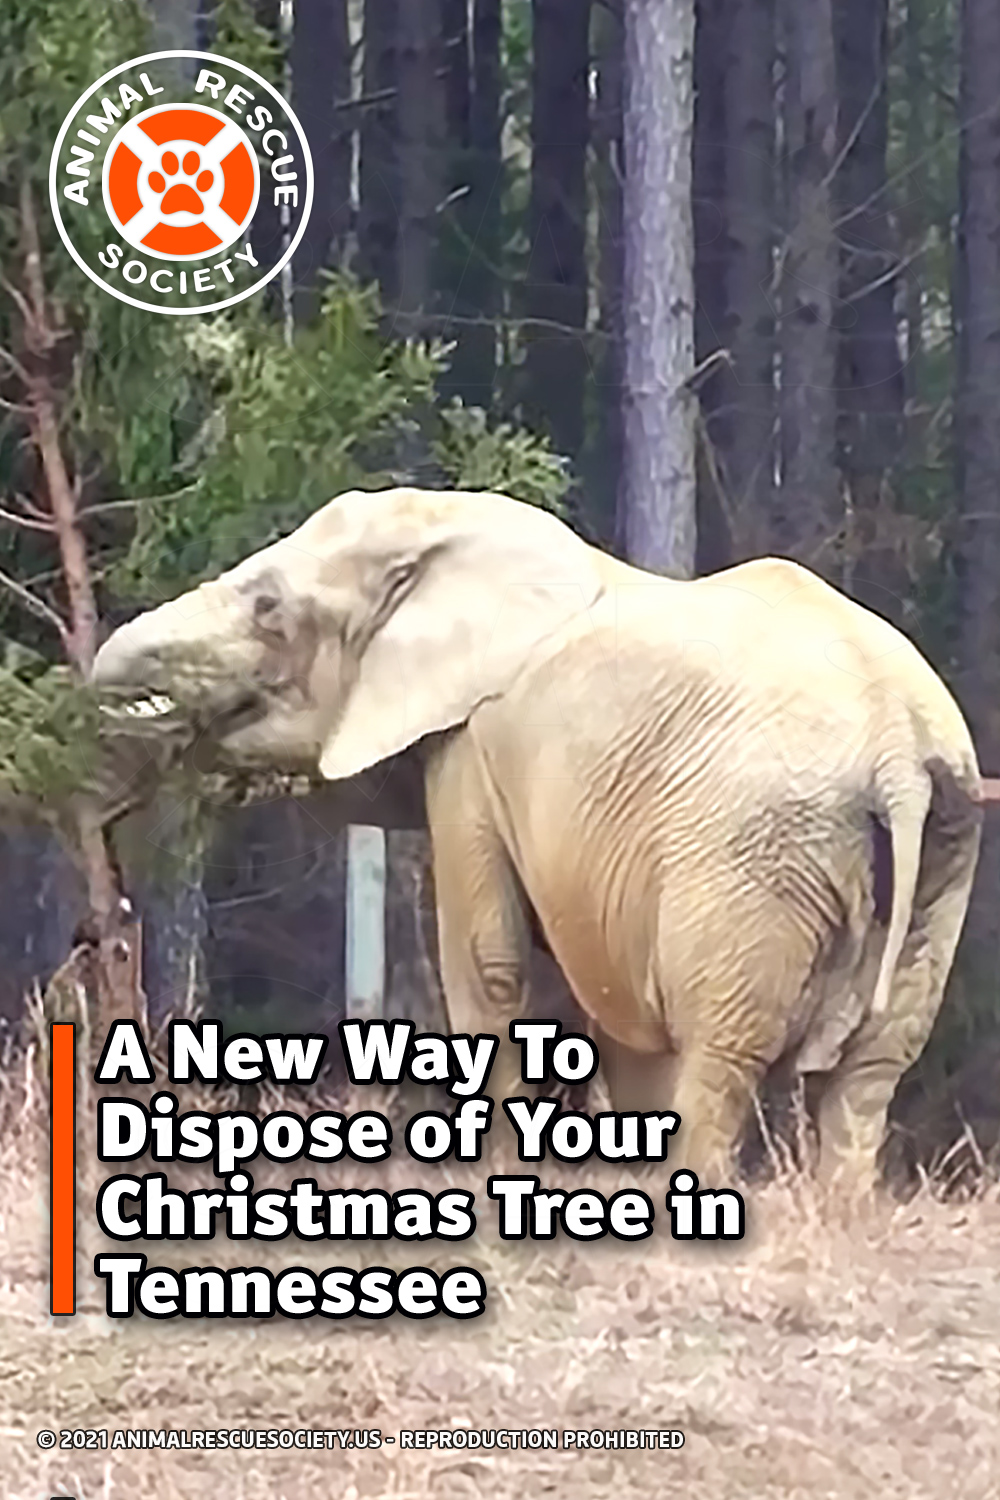 A New Way To Dispose of Your Christmas Tree in Tennessee